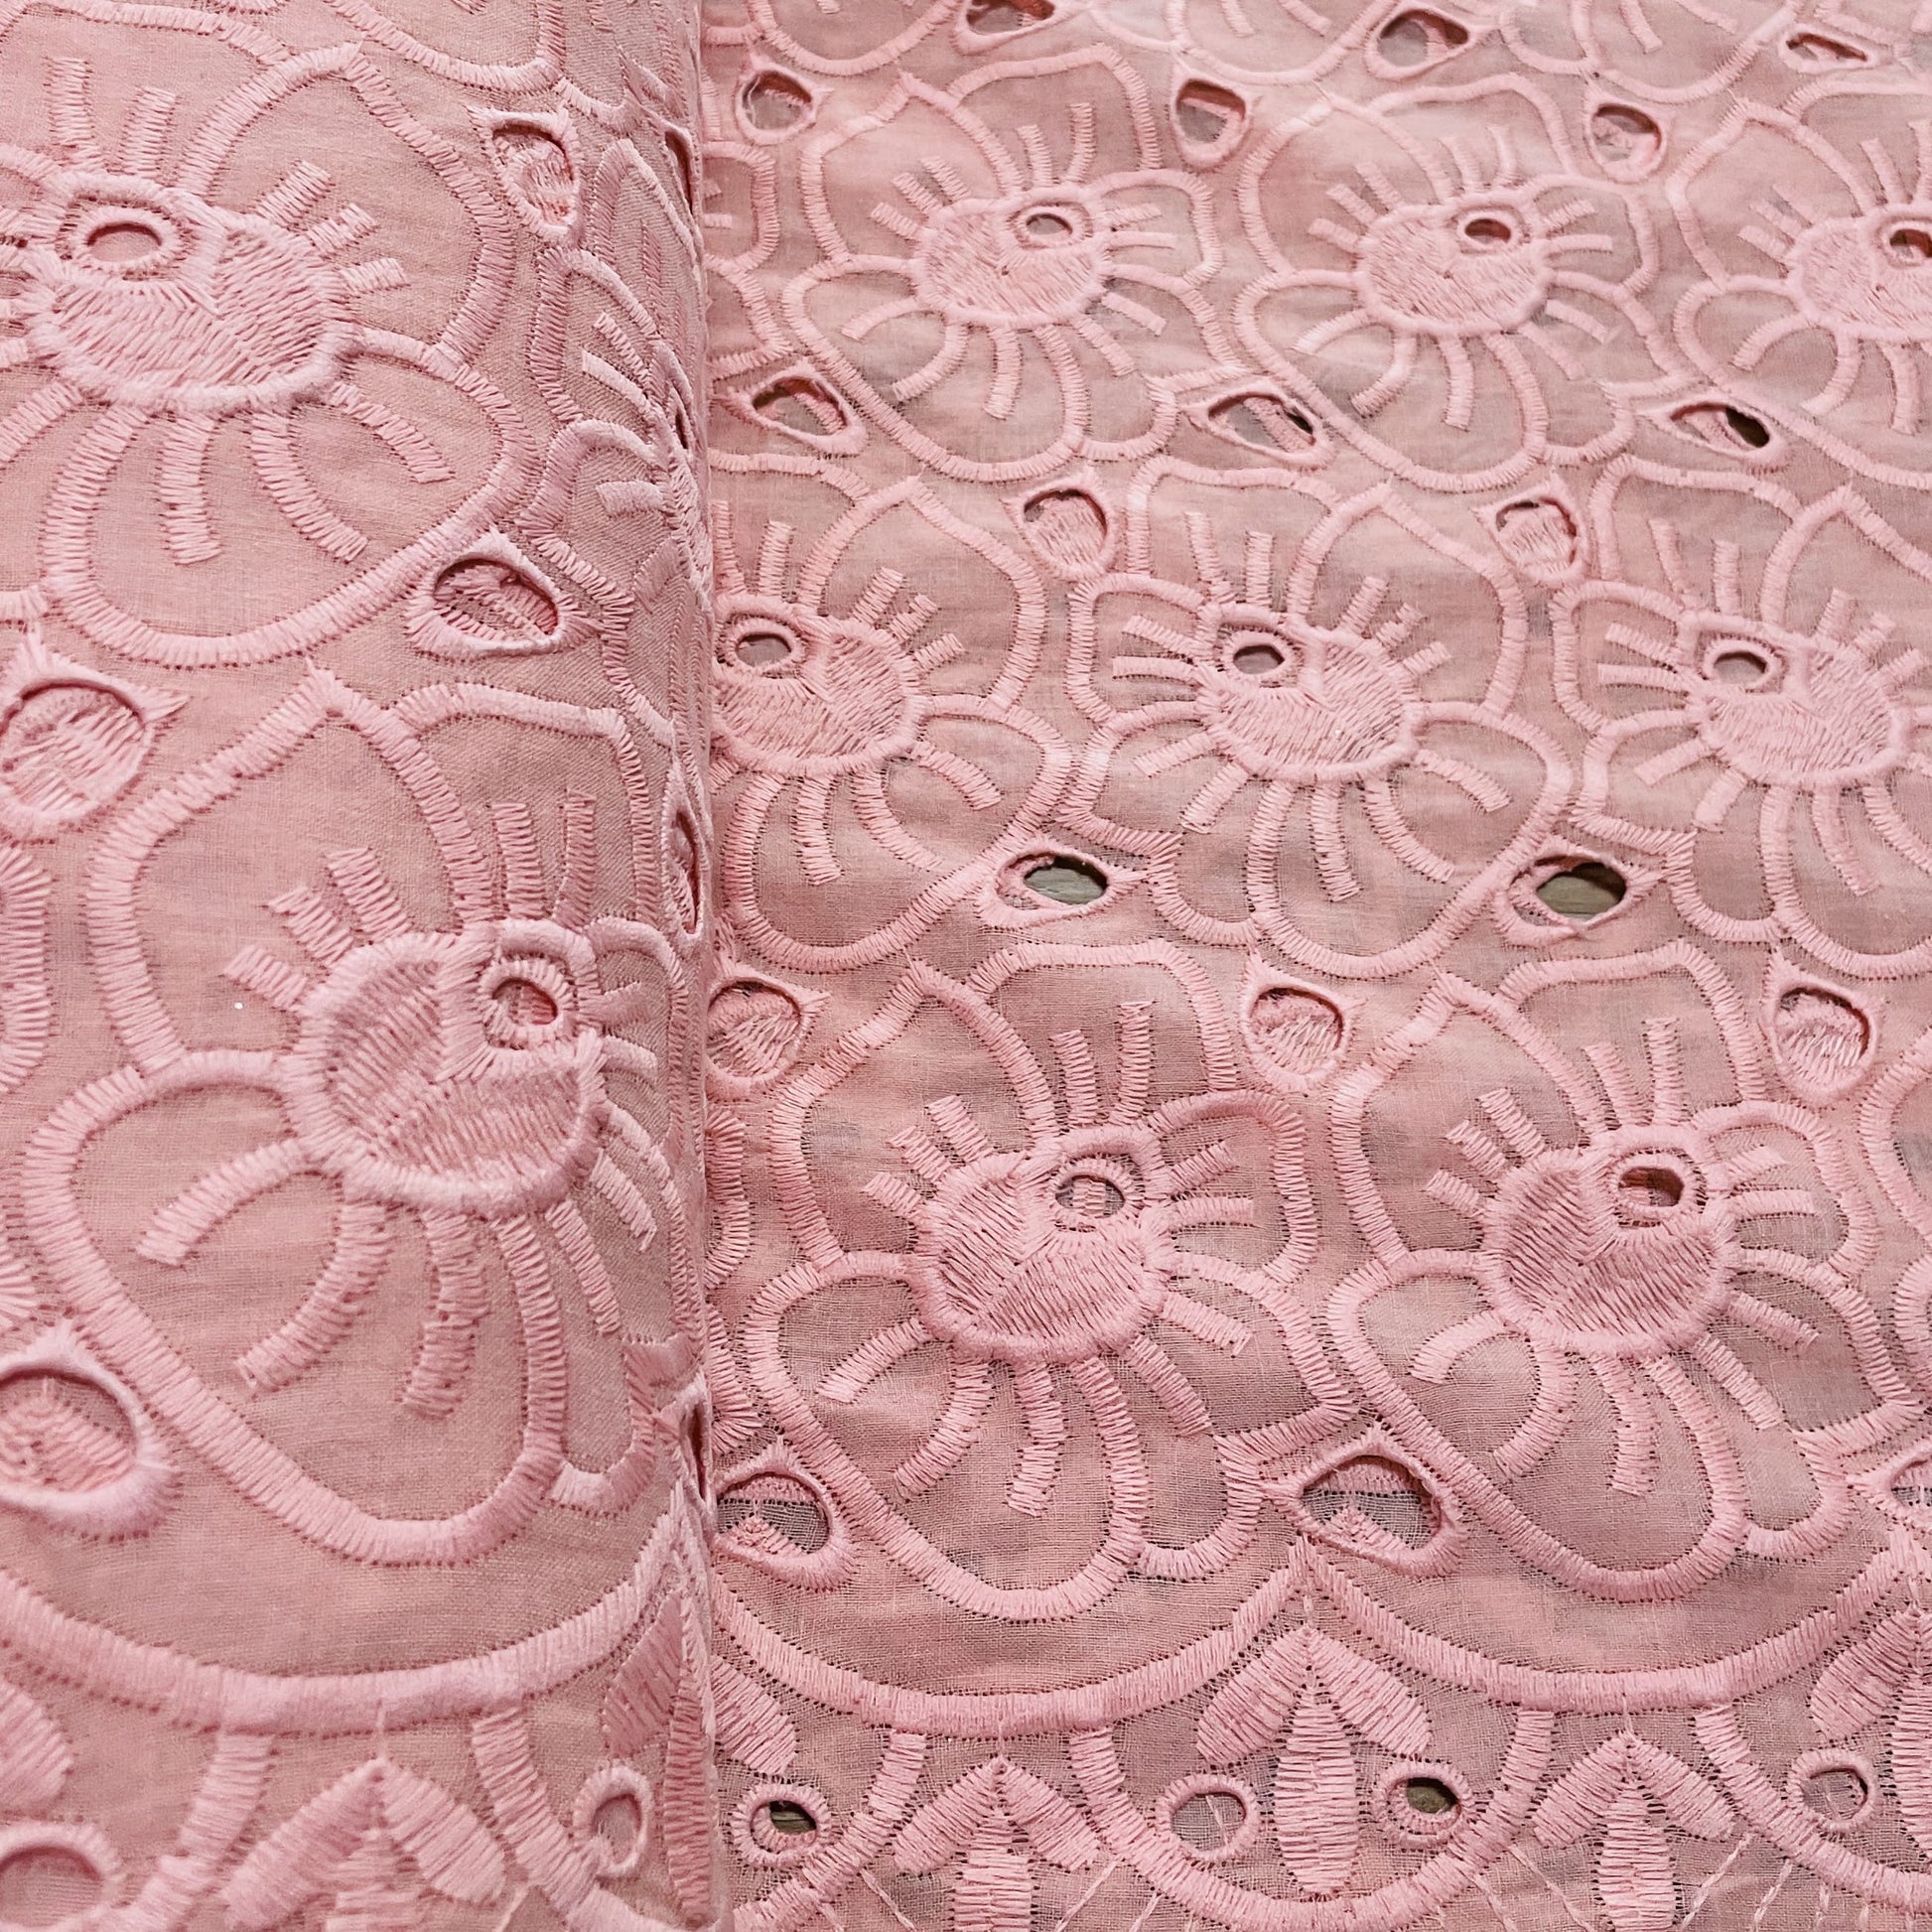 Premium Coral Pink Abstract Flower Embroidery Cotton Schiffli Fabric